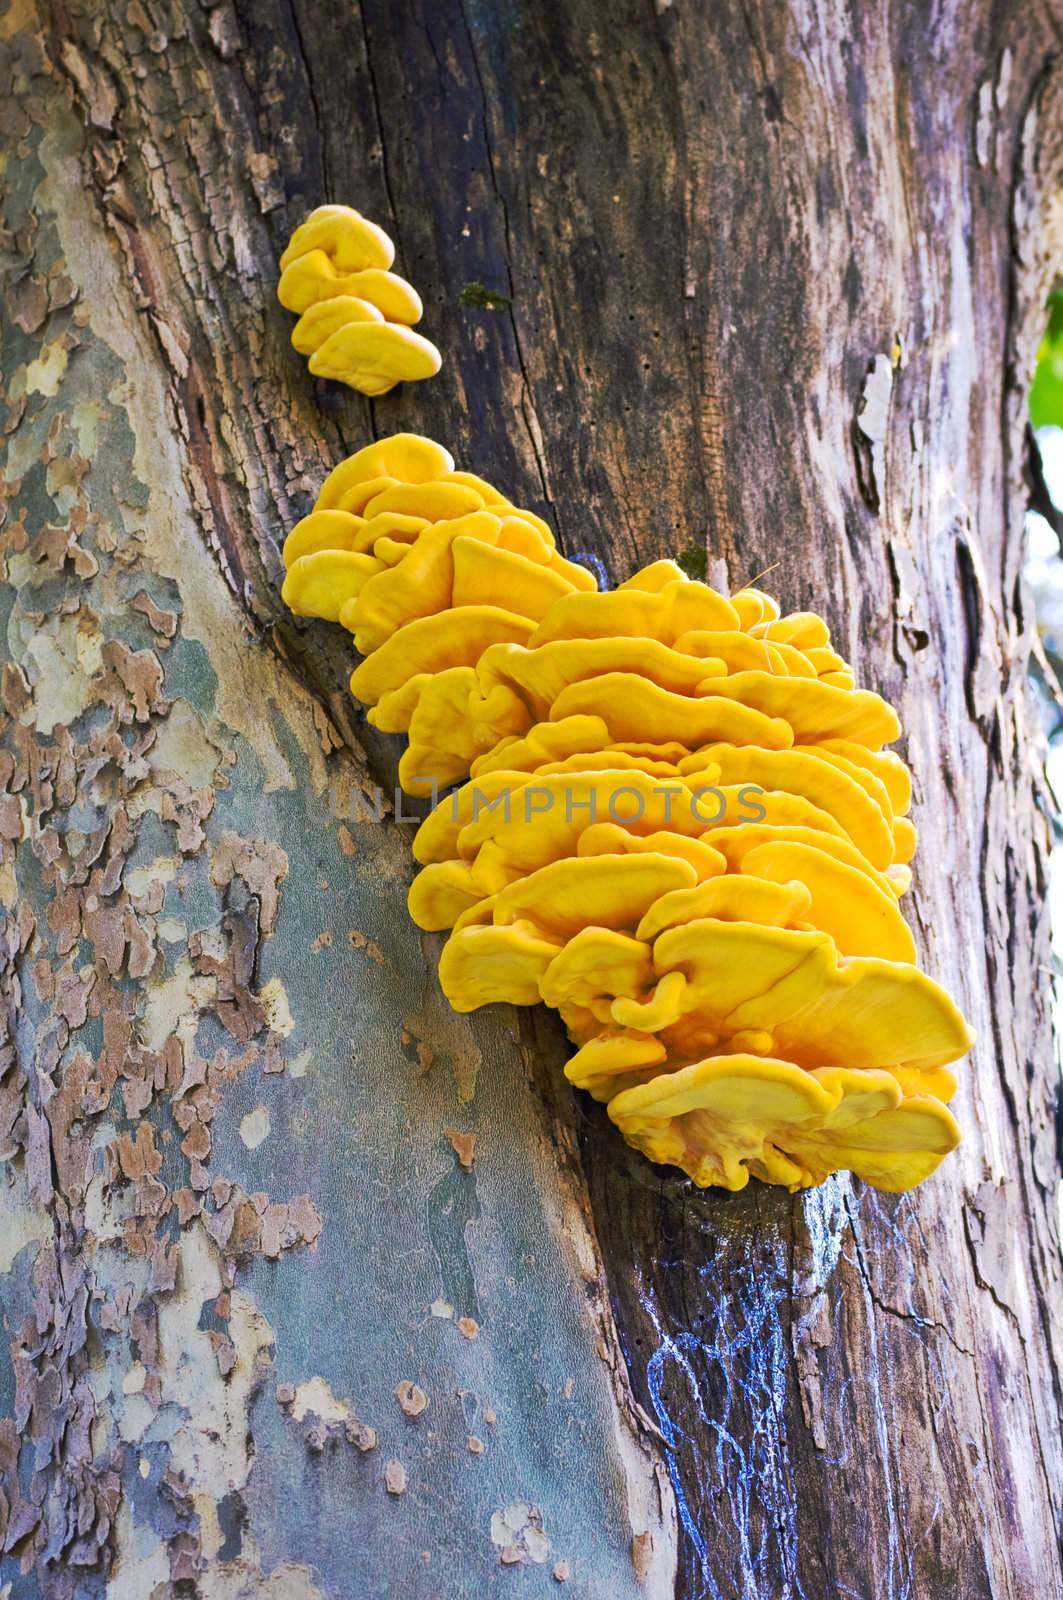 Chicken of the woods - Laetiporus Sulphureus by sil